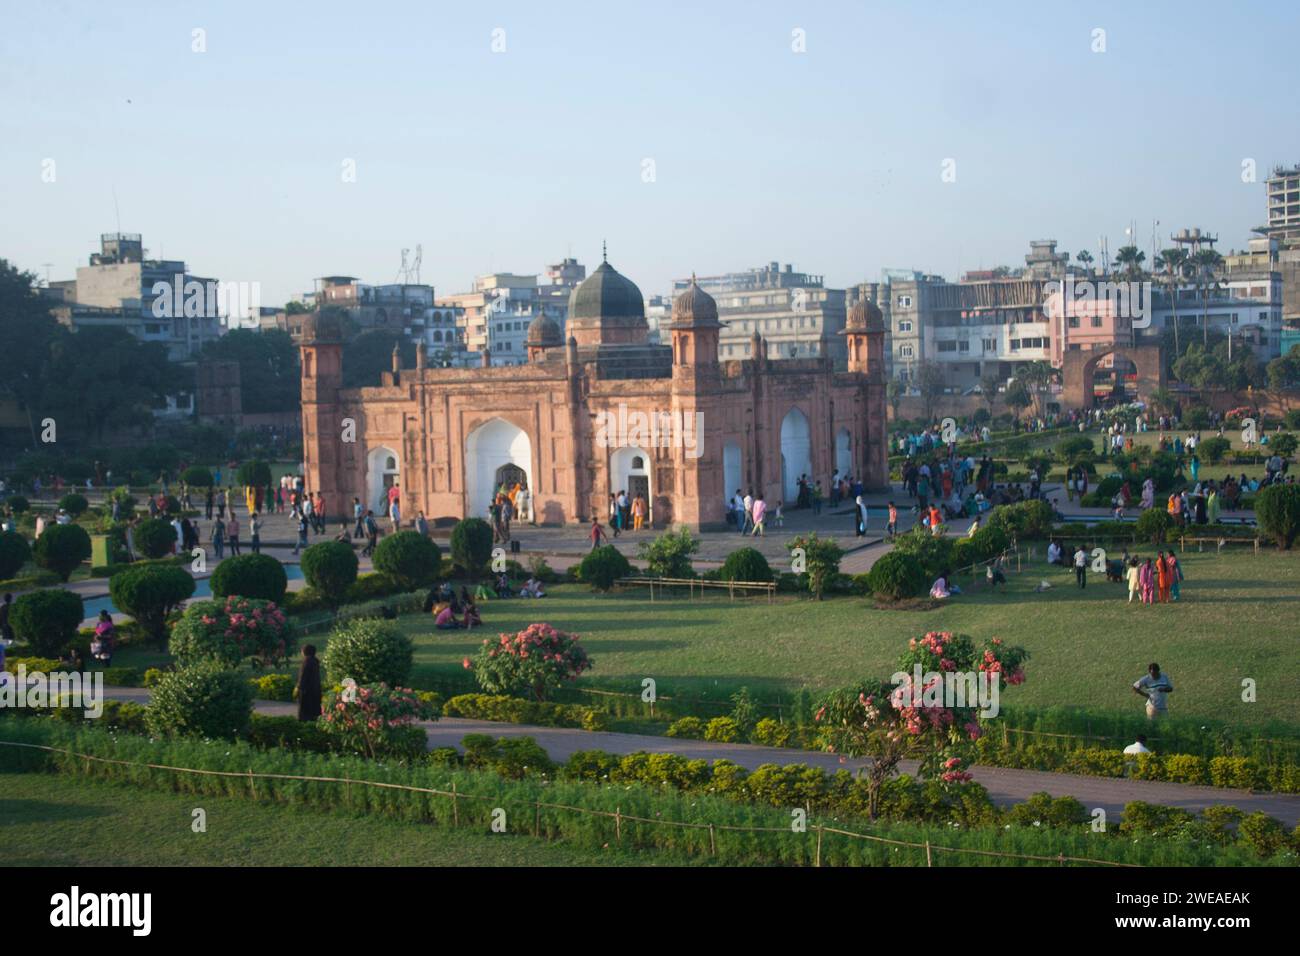 Lalbagh Fort is a fort in the old city of Dhaka. Its name is derived from its neighborhood Lalbagh, which means Red Garden. The term Lalbagh refers to reddish and pinkish architecture from the Mughal period. The original fort was called Fort Aurangabad. Bangladesh. Stock Photo